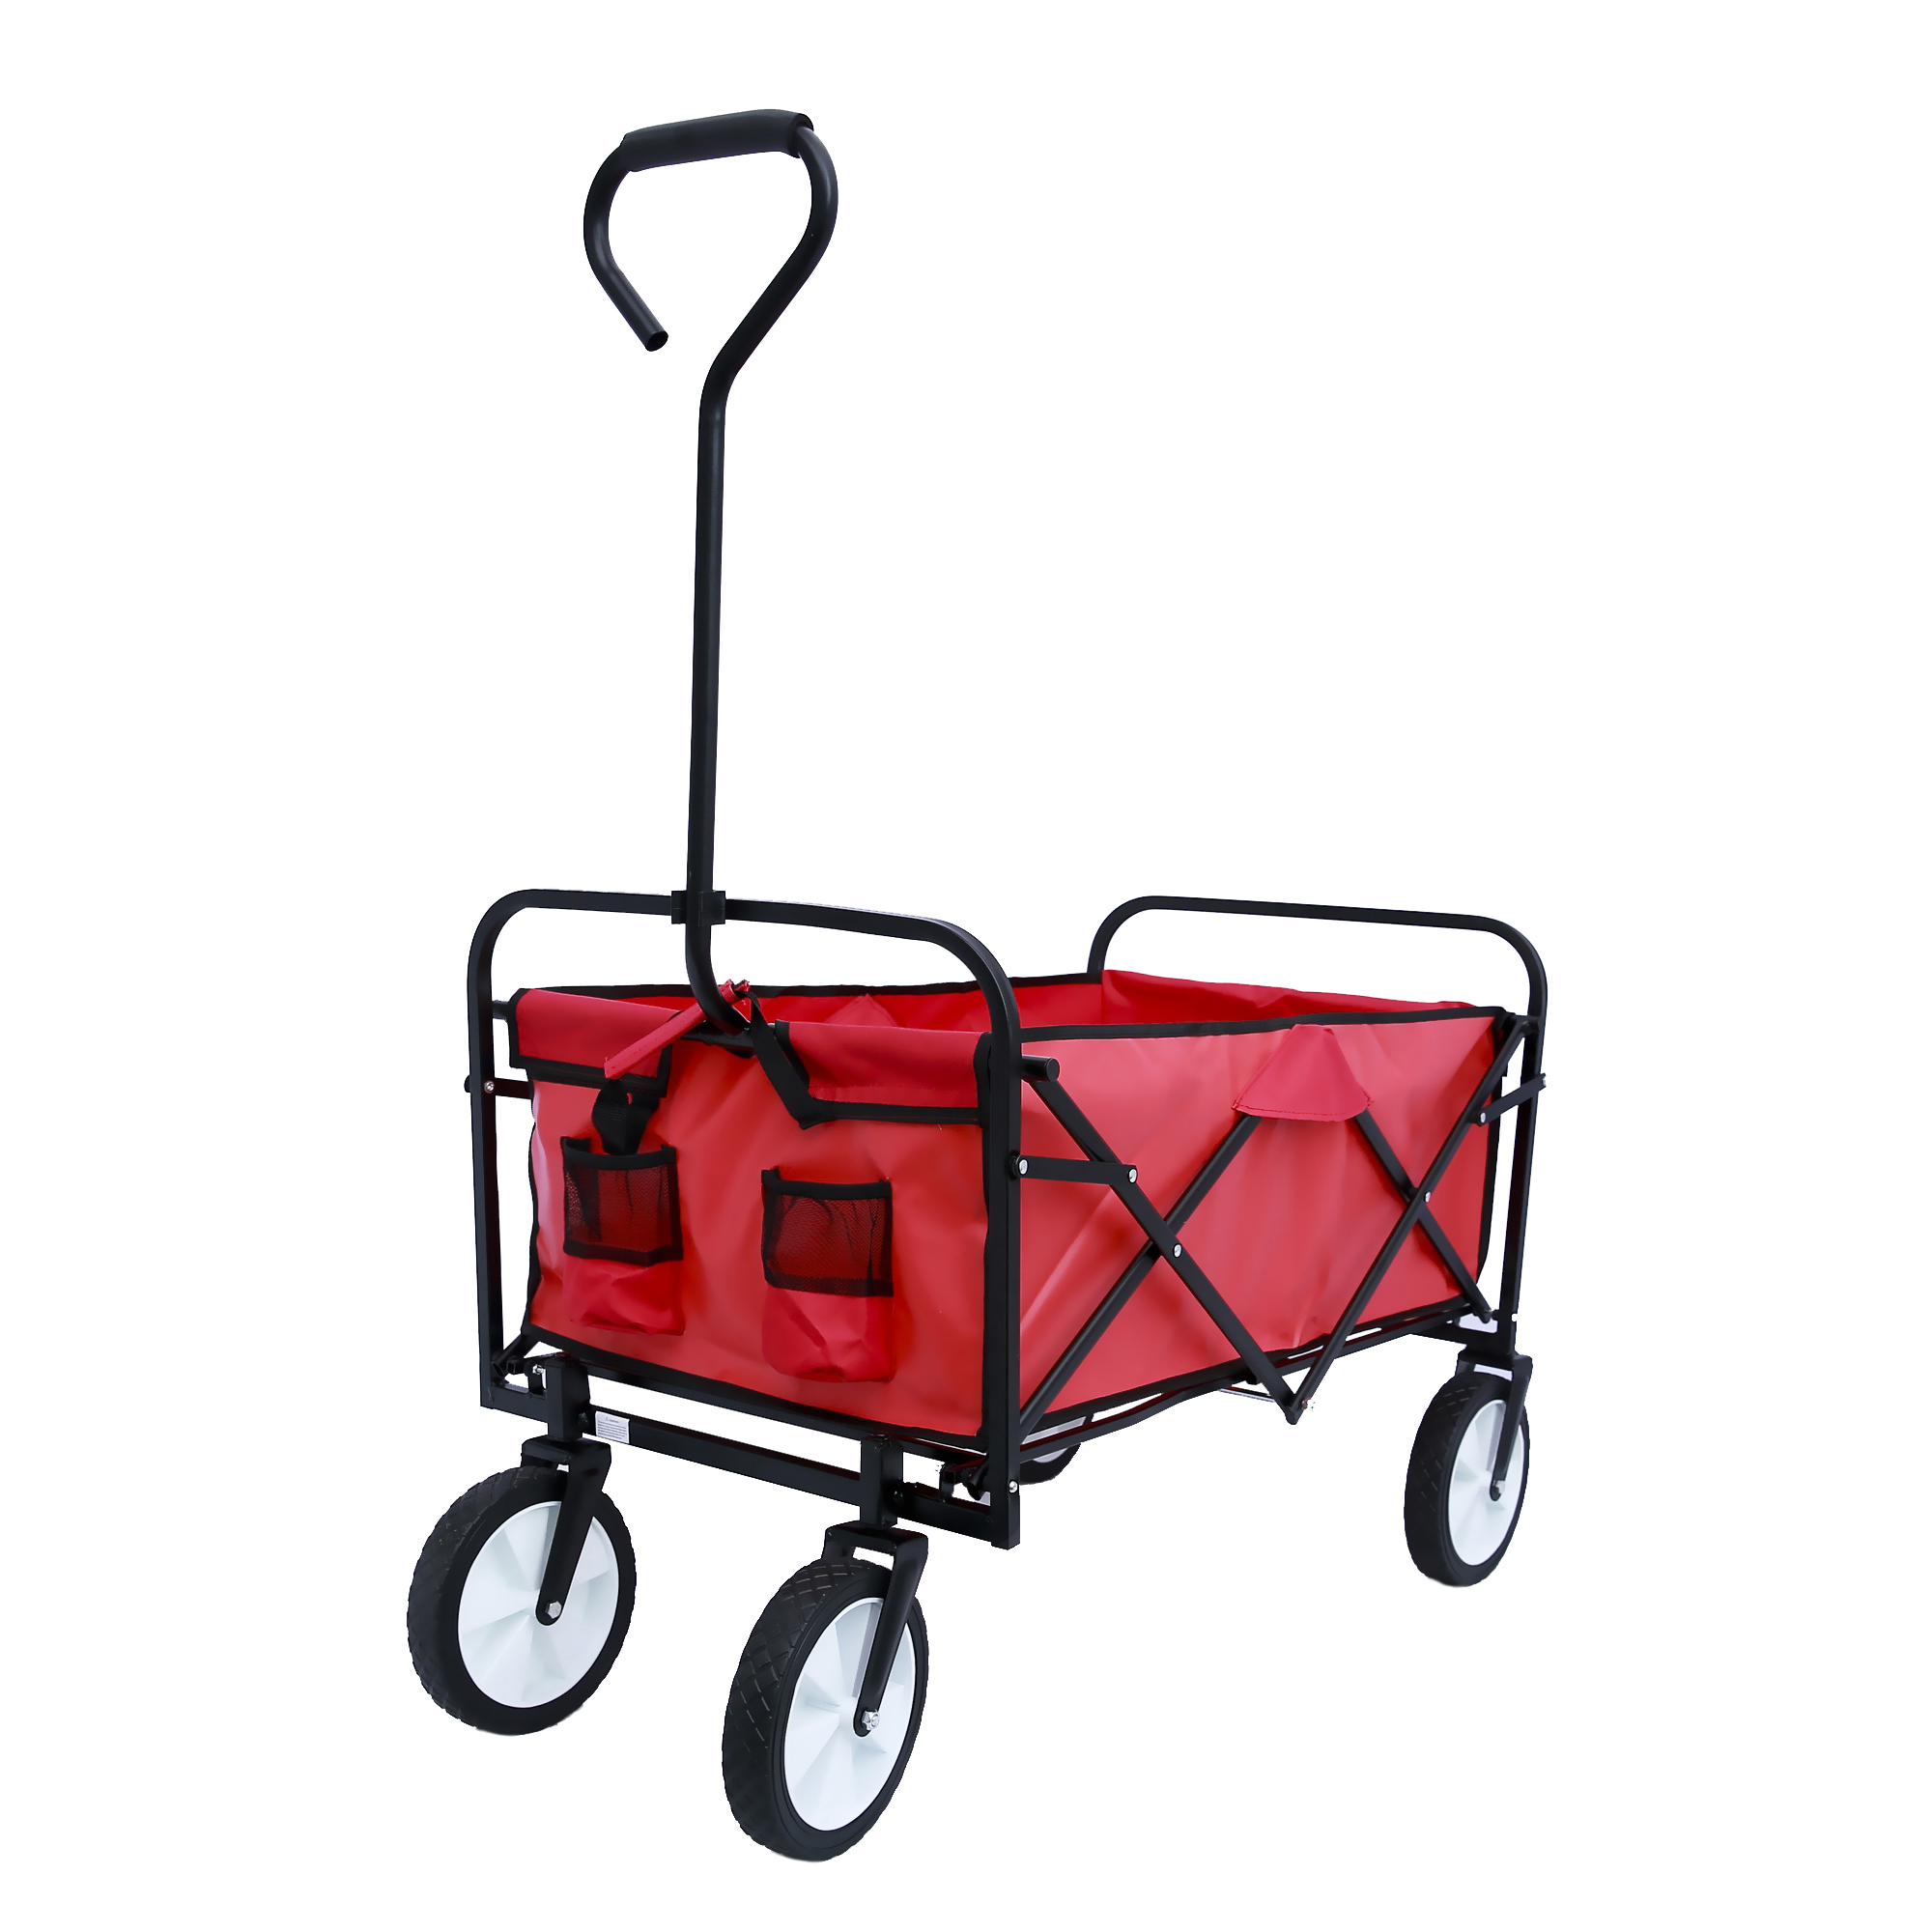 Beach Wagons with Big Wheels for Sand, Sturdy Steel Frame Collapsible Wagon, Foldable Wagon, Grocery Wagon with 2 Mesh Cup Holders, Adjustable Handle for Garden Shopping Picnic Beach, Red, Q3809 - image 2 of 11